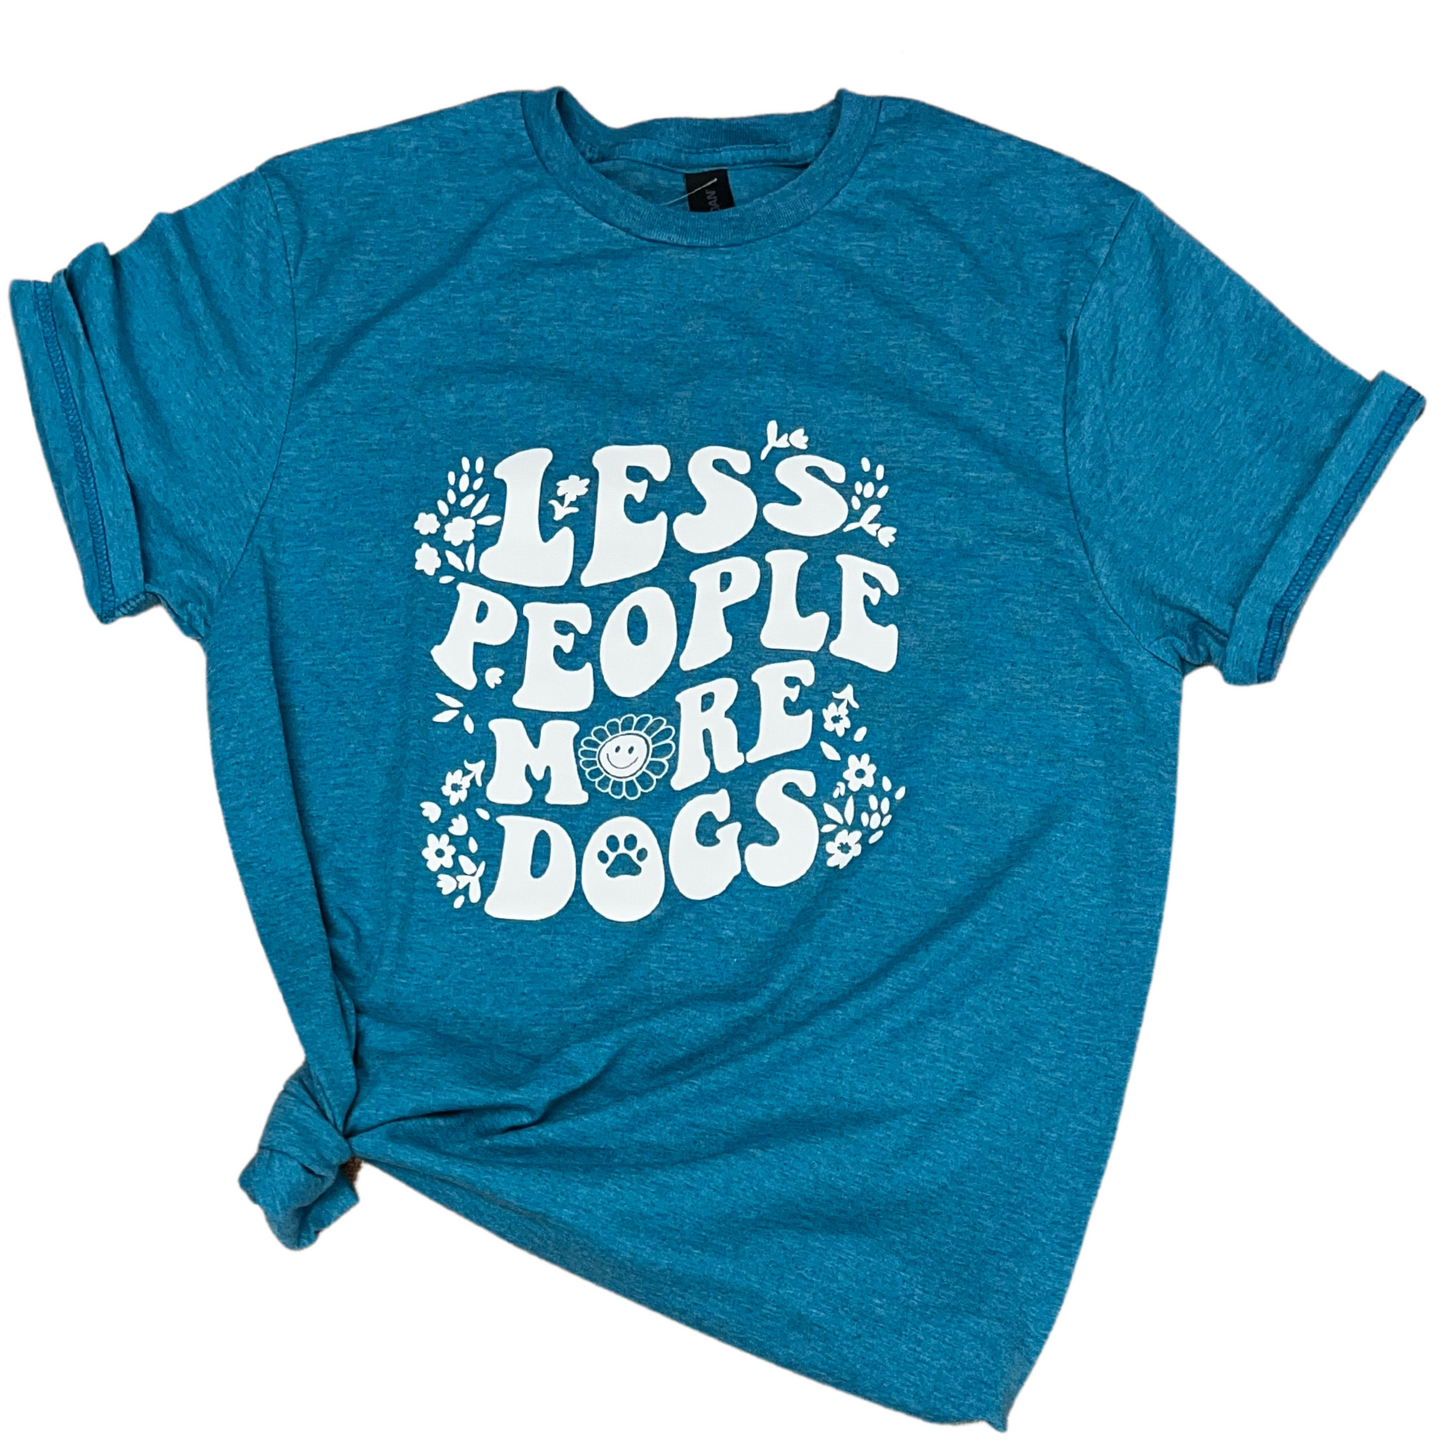 Less People, More Dogs T-Shirt